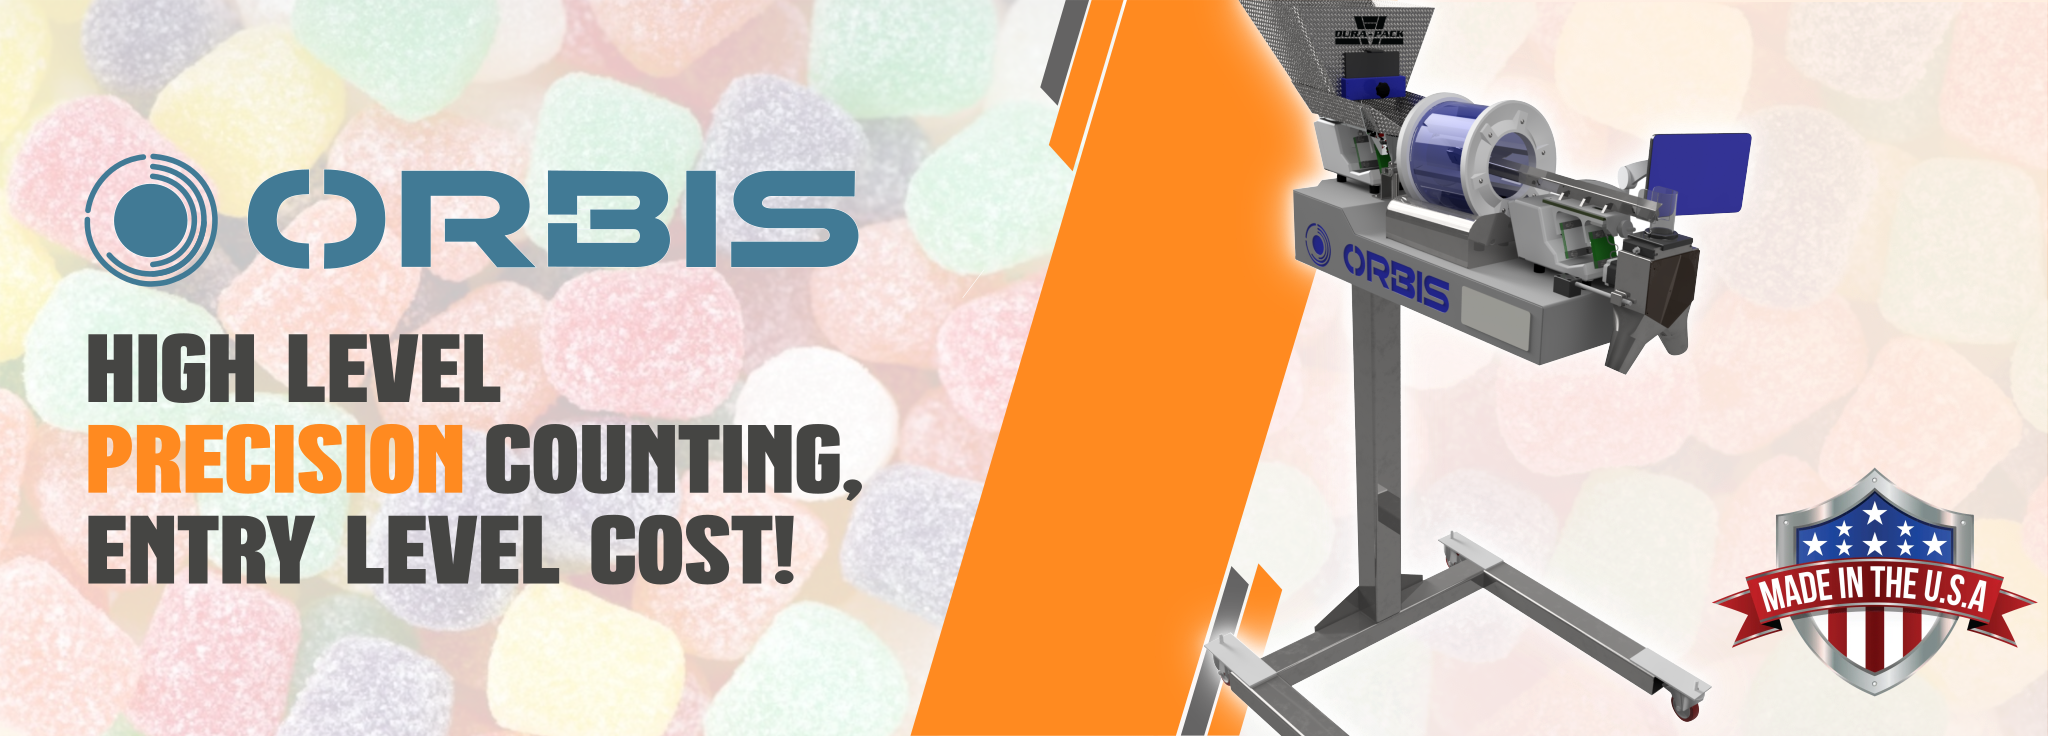 Orbis, High Level Precision Counting